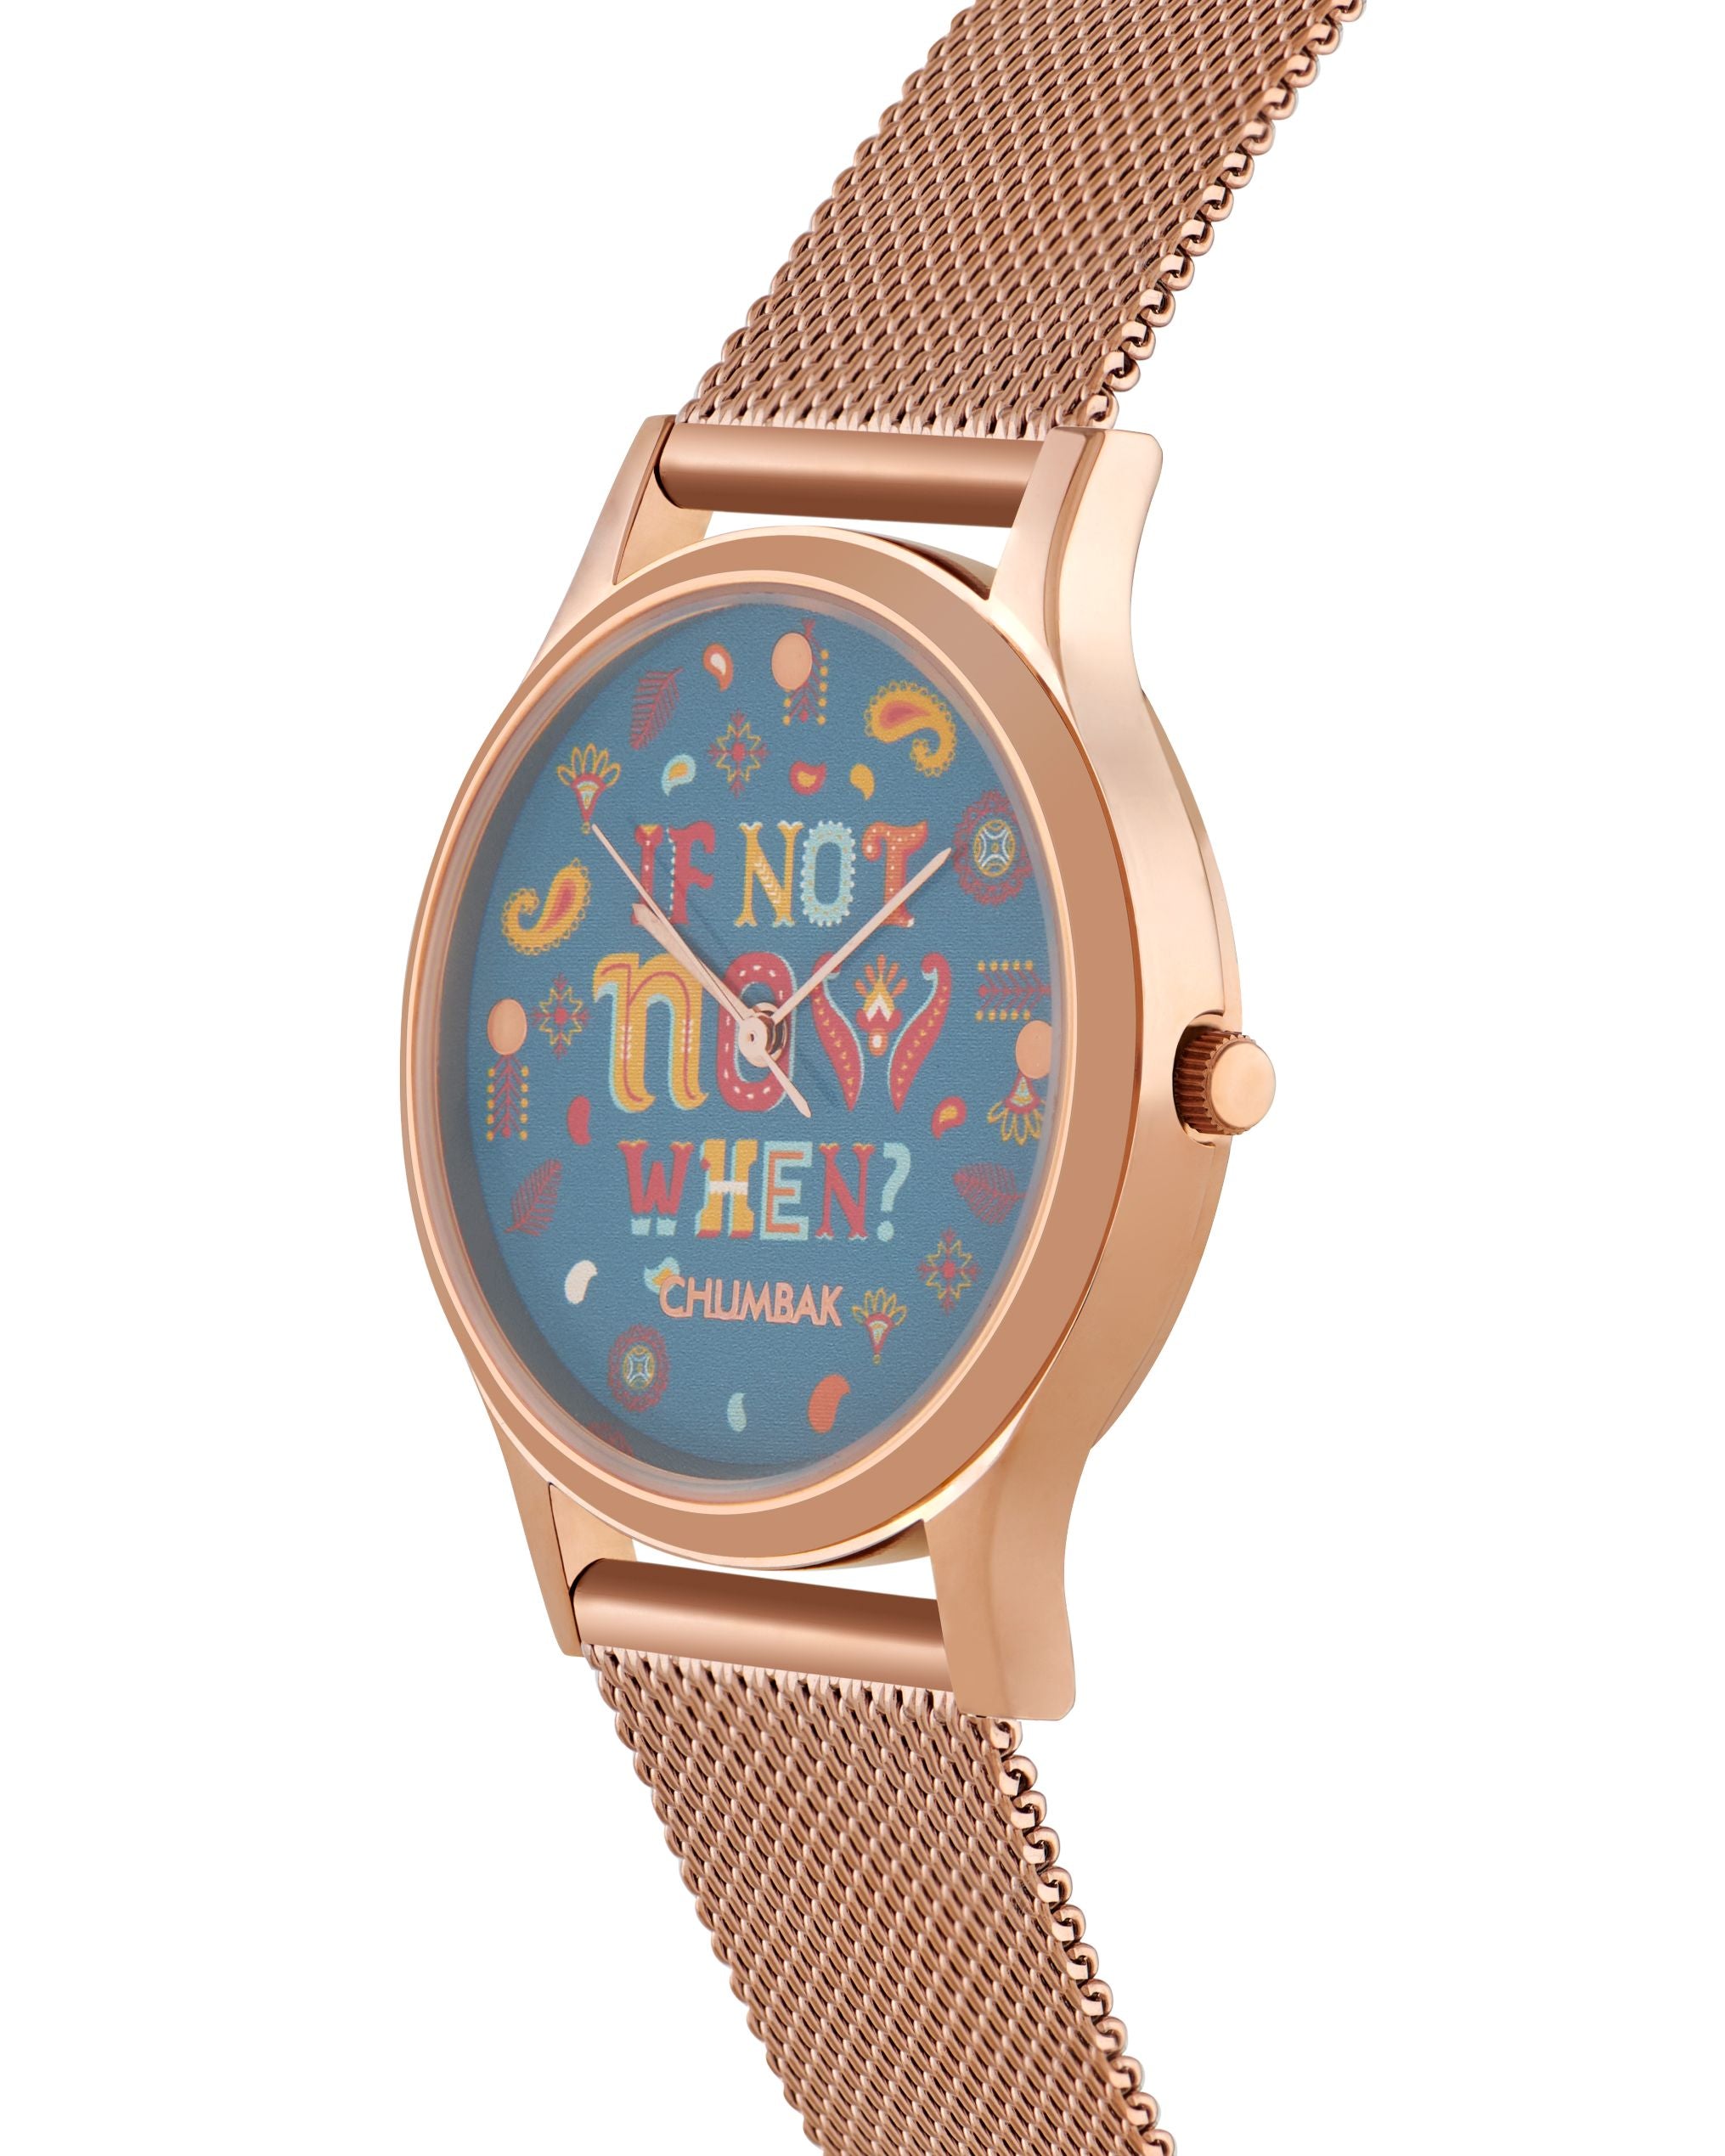 Teal by Chumbak Daily Hustle Watch,Stainless Steel Mesh Strap